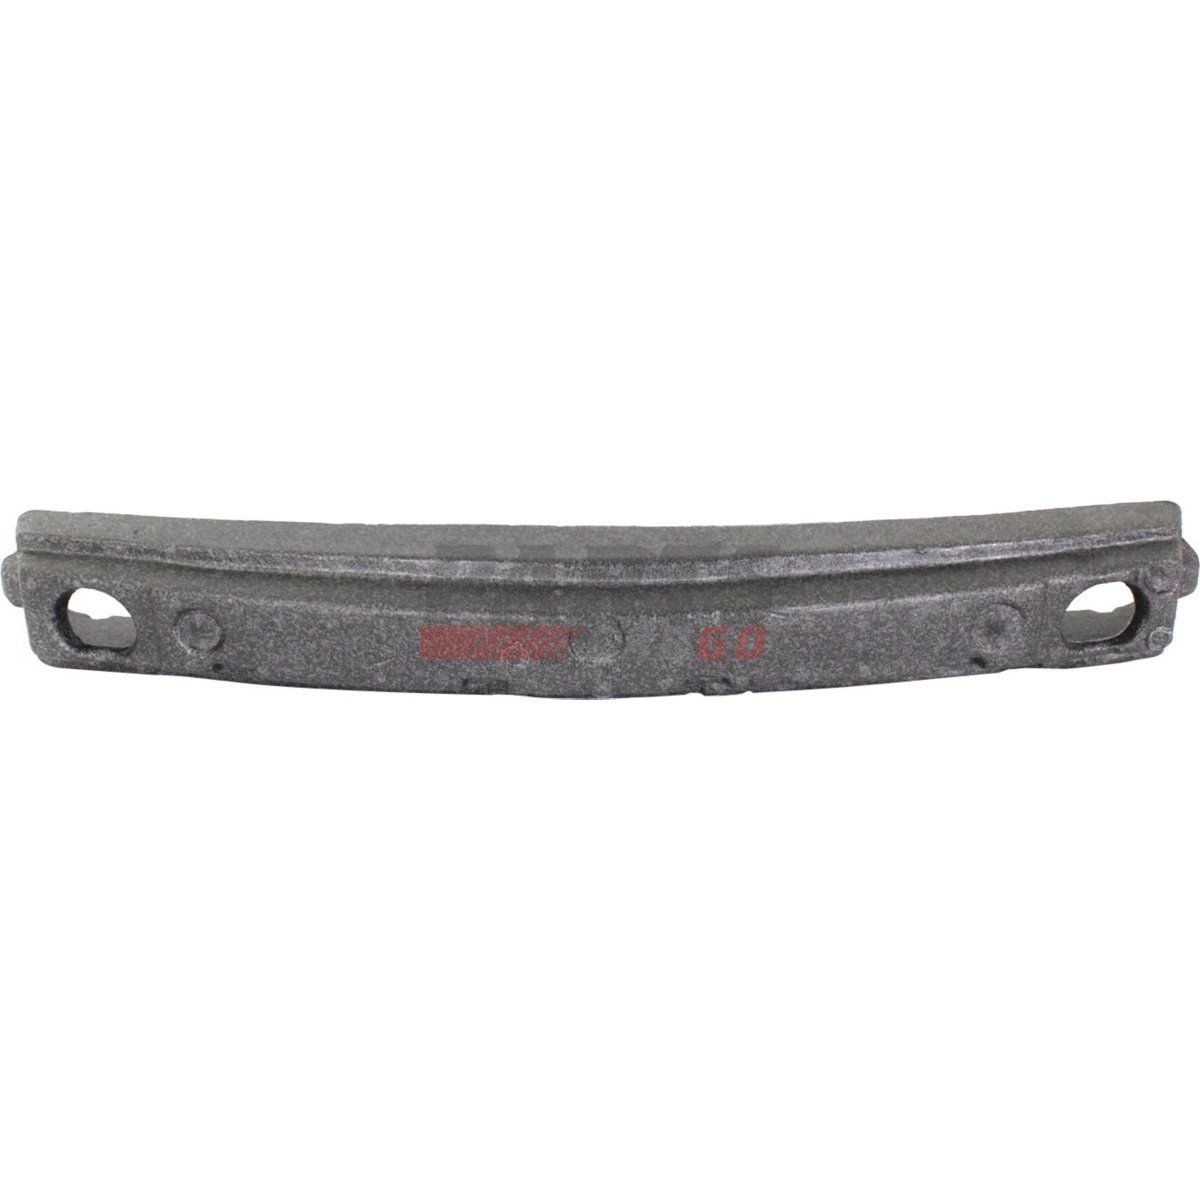 New Bumper Impact Absorber for Mercedes-Benz ML500 MB1070100 2006 to 2007